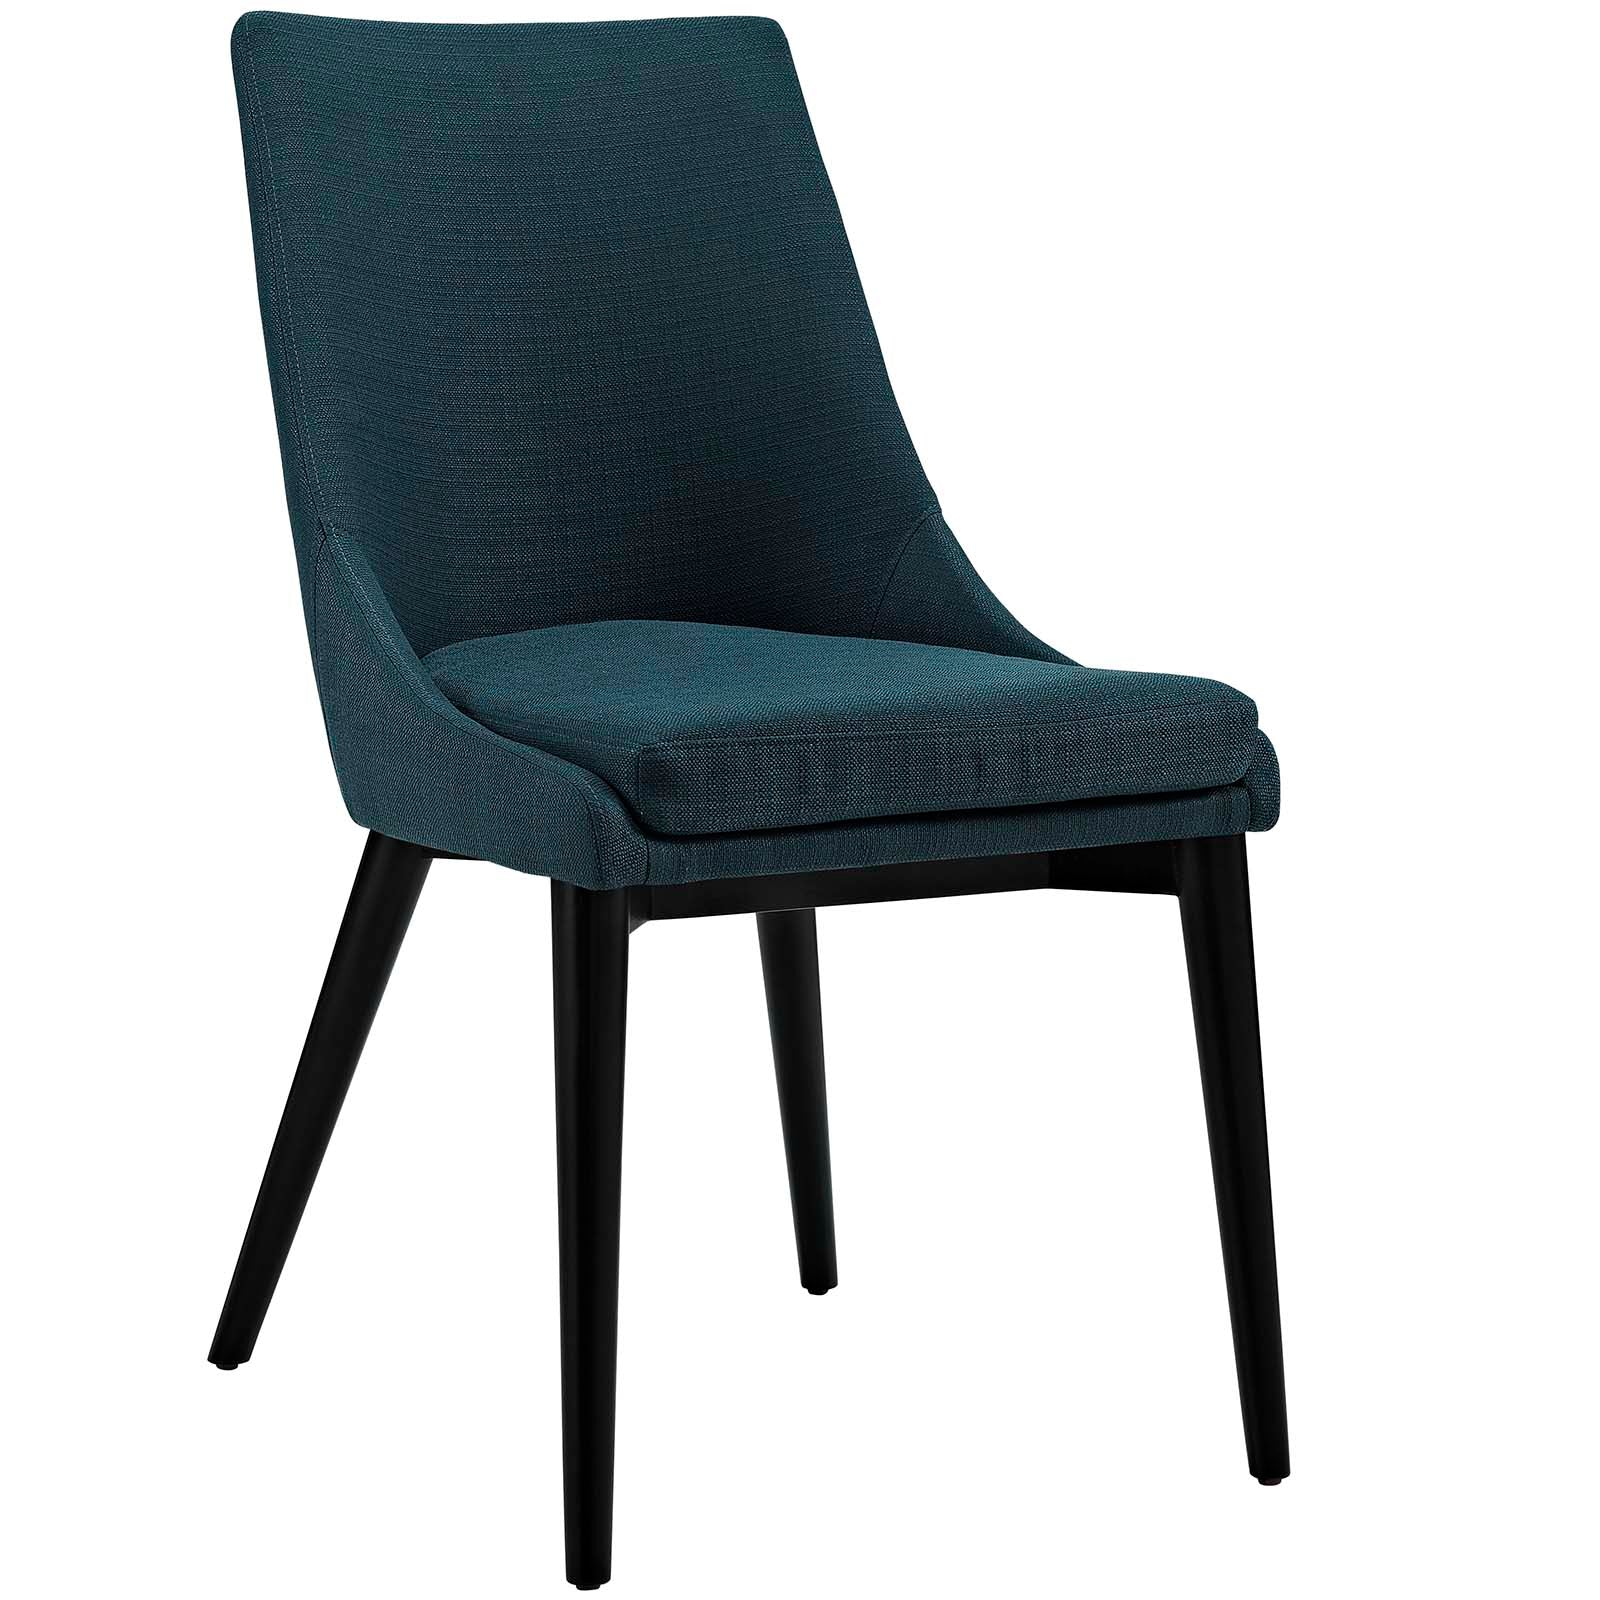 Viscount Accent Performance Velvet Dining Side Chair - Formal Dining Room Chair